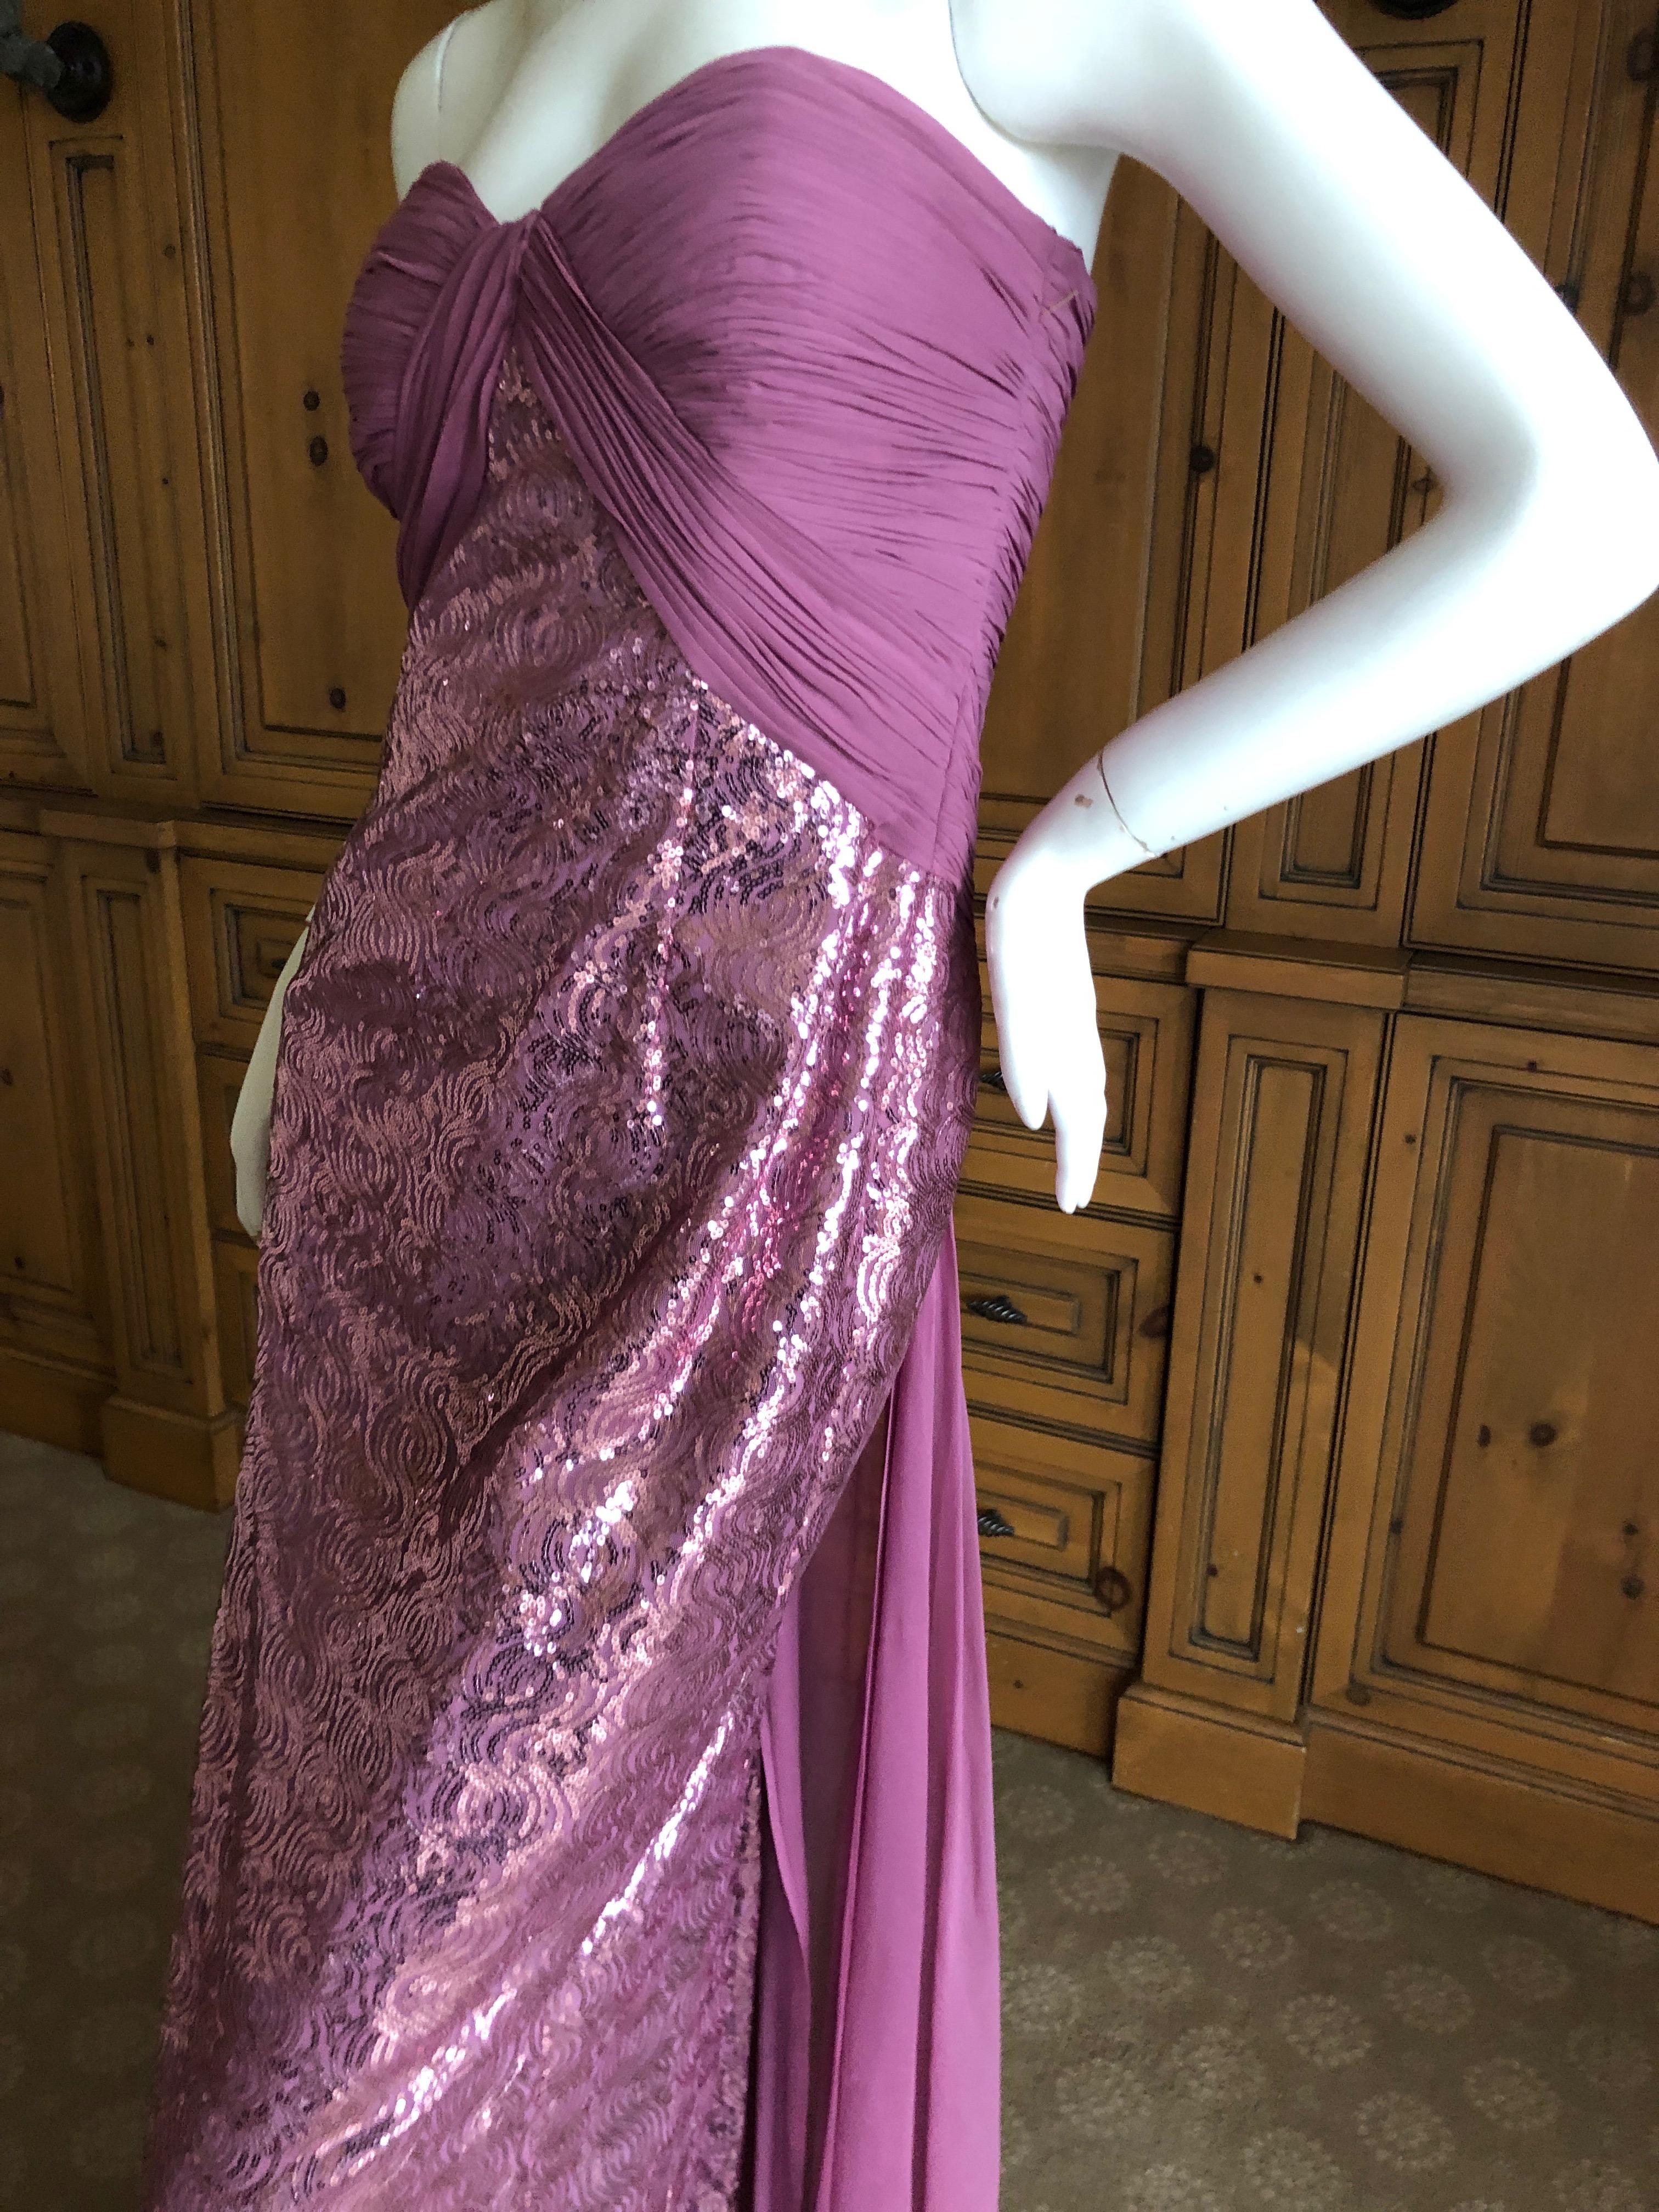 Vicky Tiel Paris 80's Lavender Pink Strapless Sequin Corseted Evening Dress.
The witty quote was 